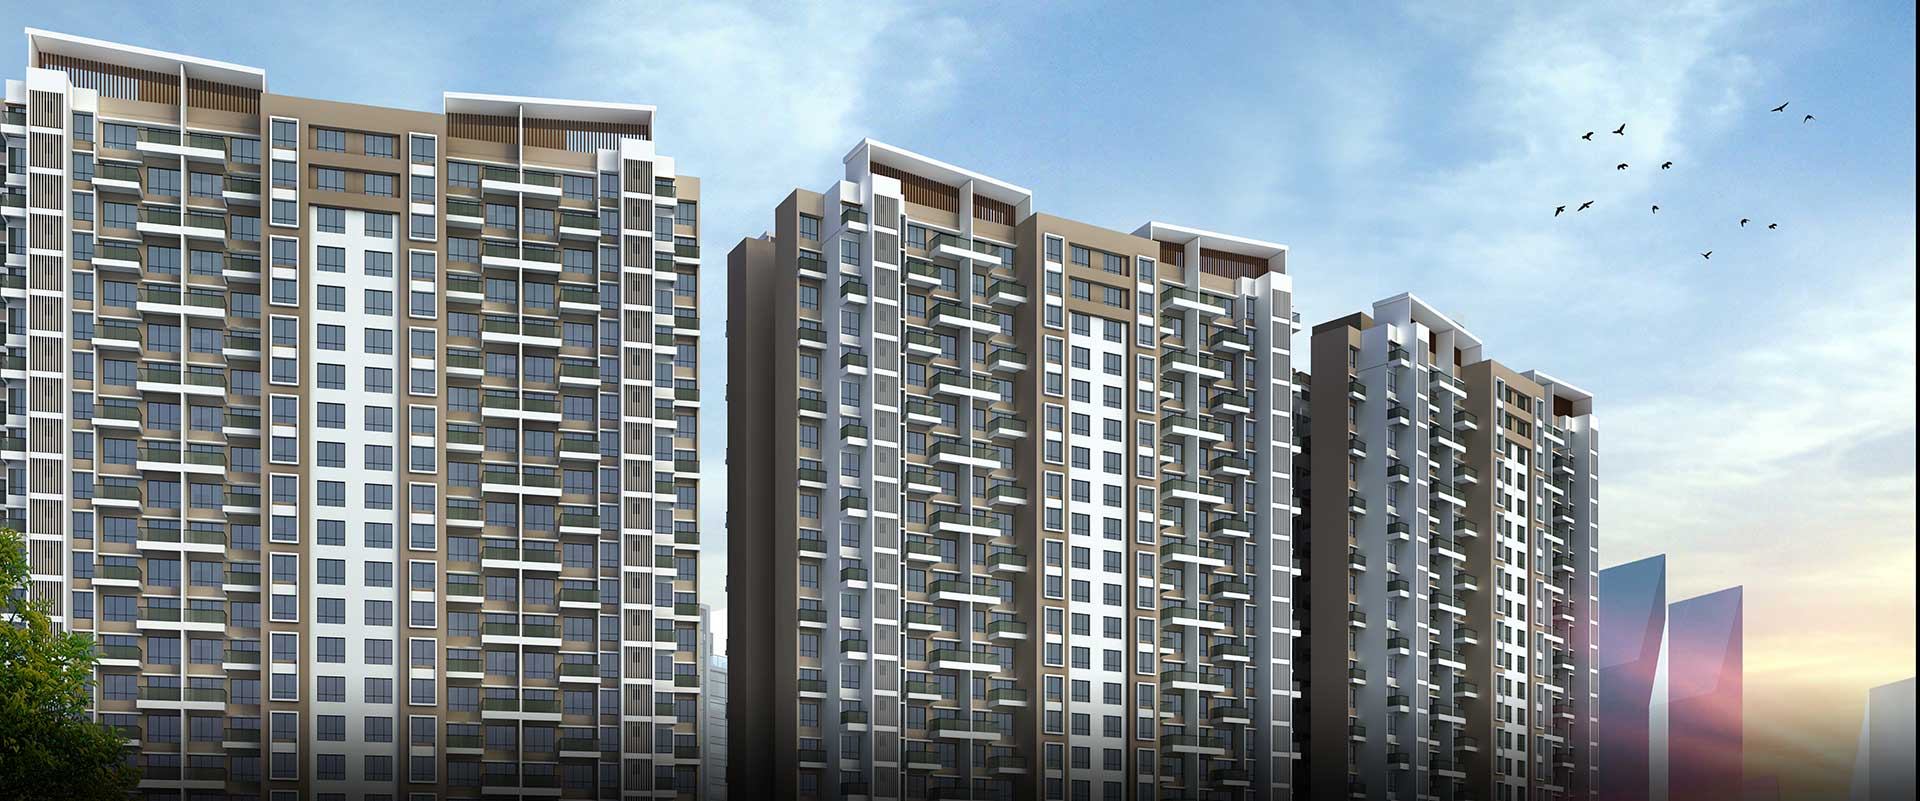 PREMIUM 2 BHK PENTHOUSE AND GARDEN HOMES IN KHARADI PUNE